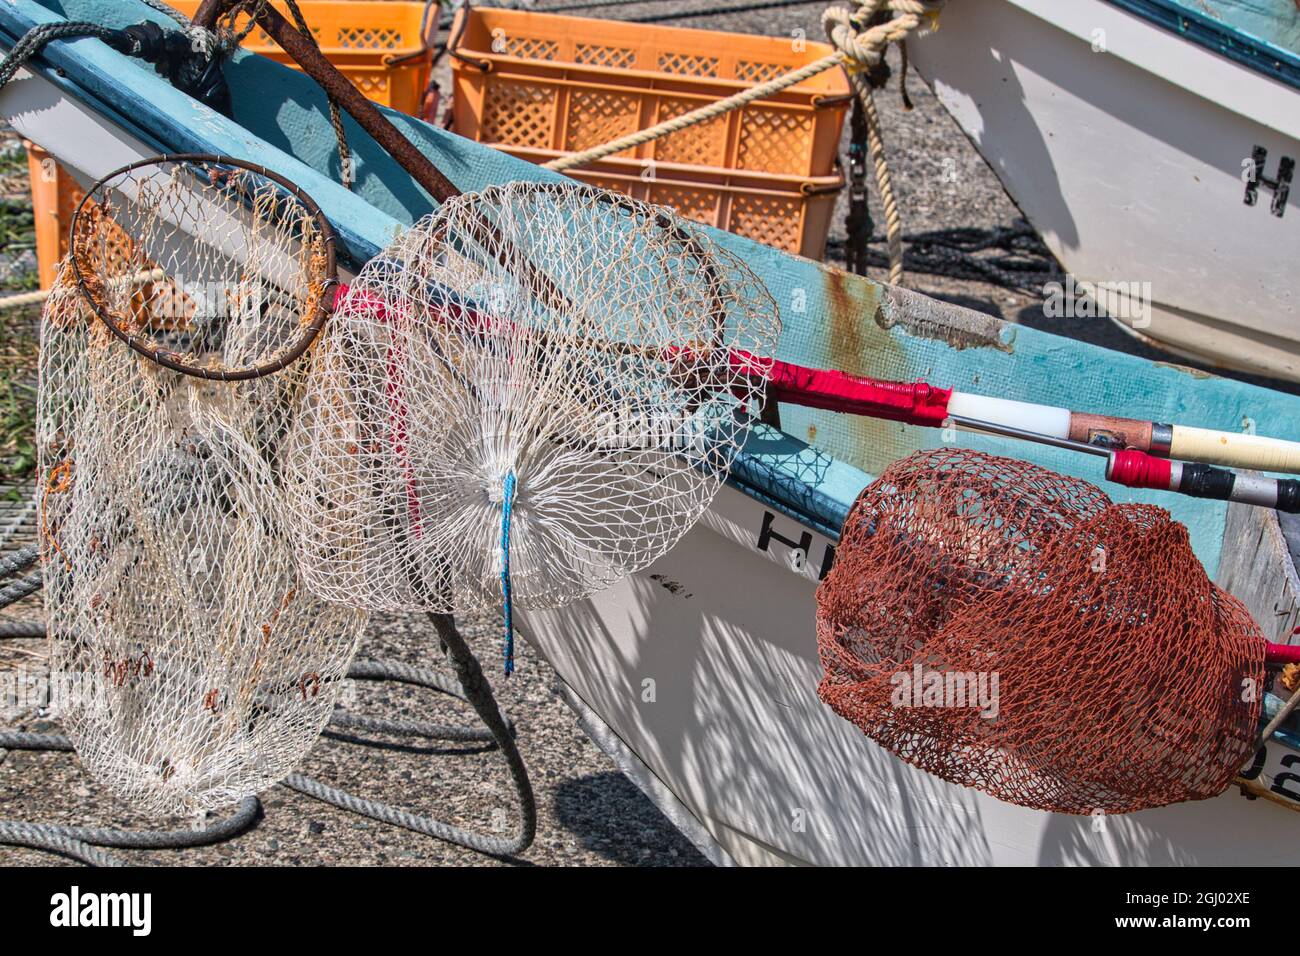 Three commercial landing nets used for fishing rest on a blue and white  boat Stock Photo - Alamy